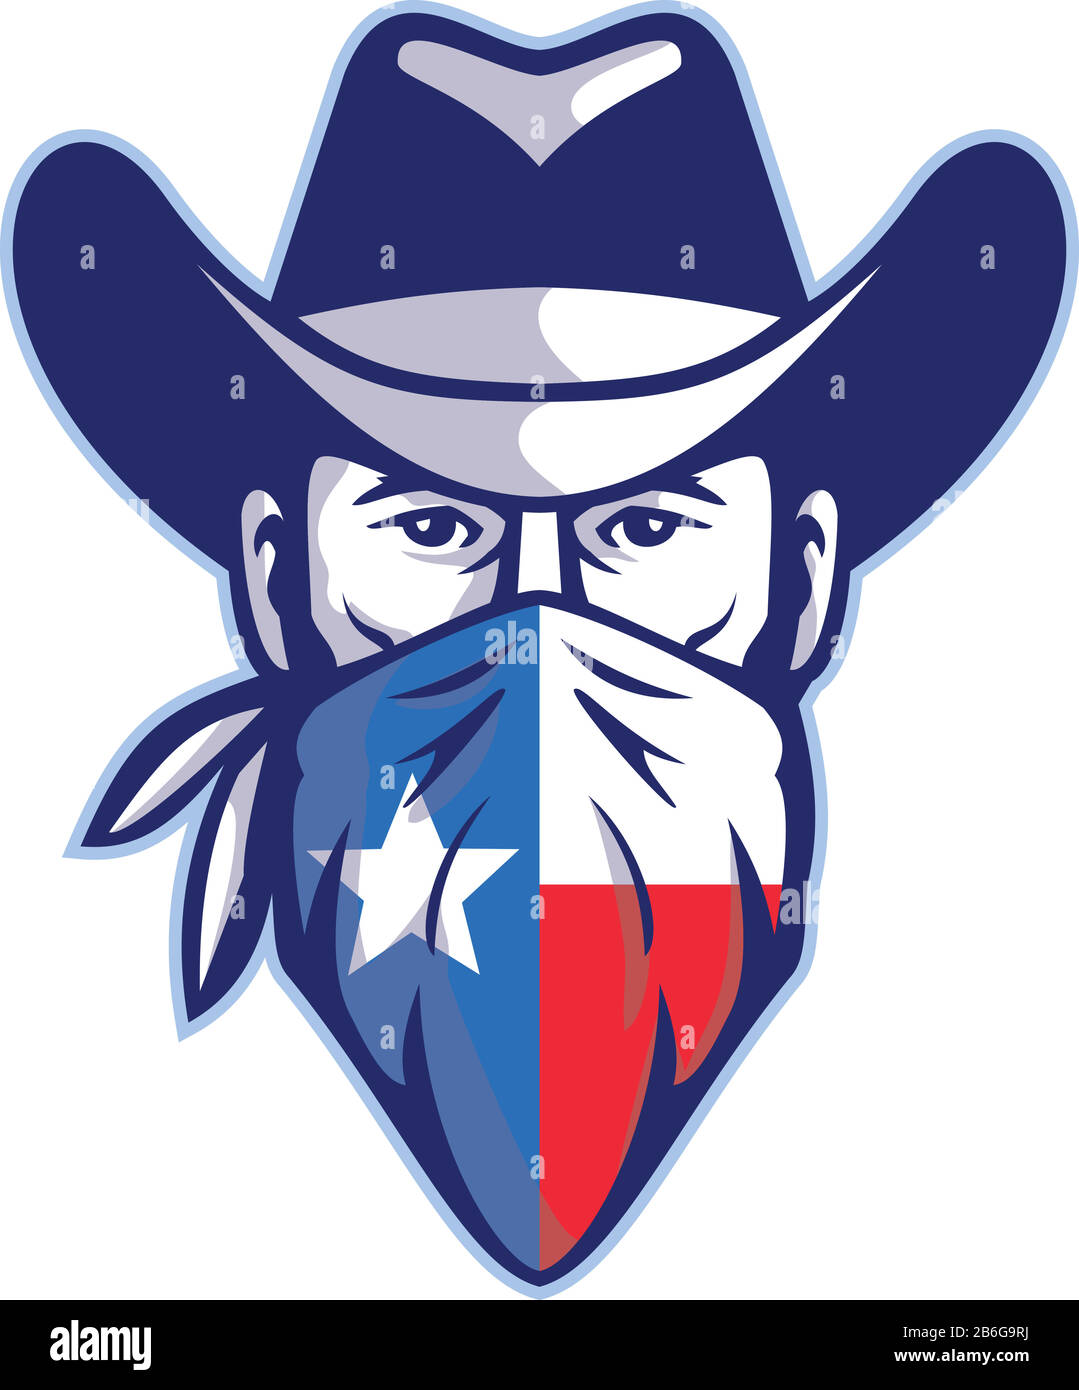 Mascot icon illustration of head of Texan bandit, outlaw or highwayman wearing cowboy hat and bandana, kerchief or bandanna with Texas Lone Star flag Stock Vector